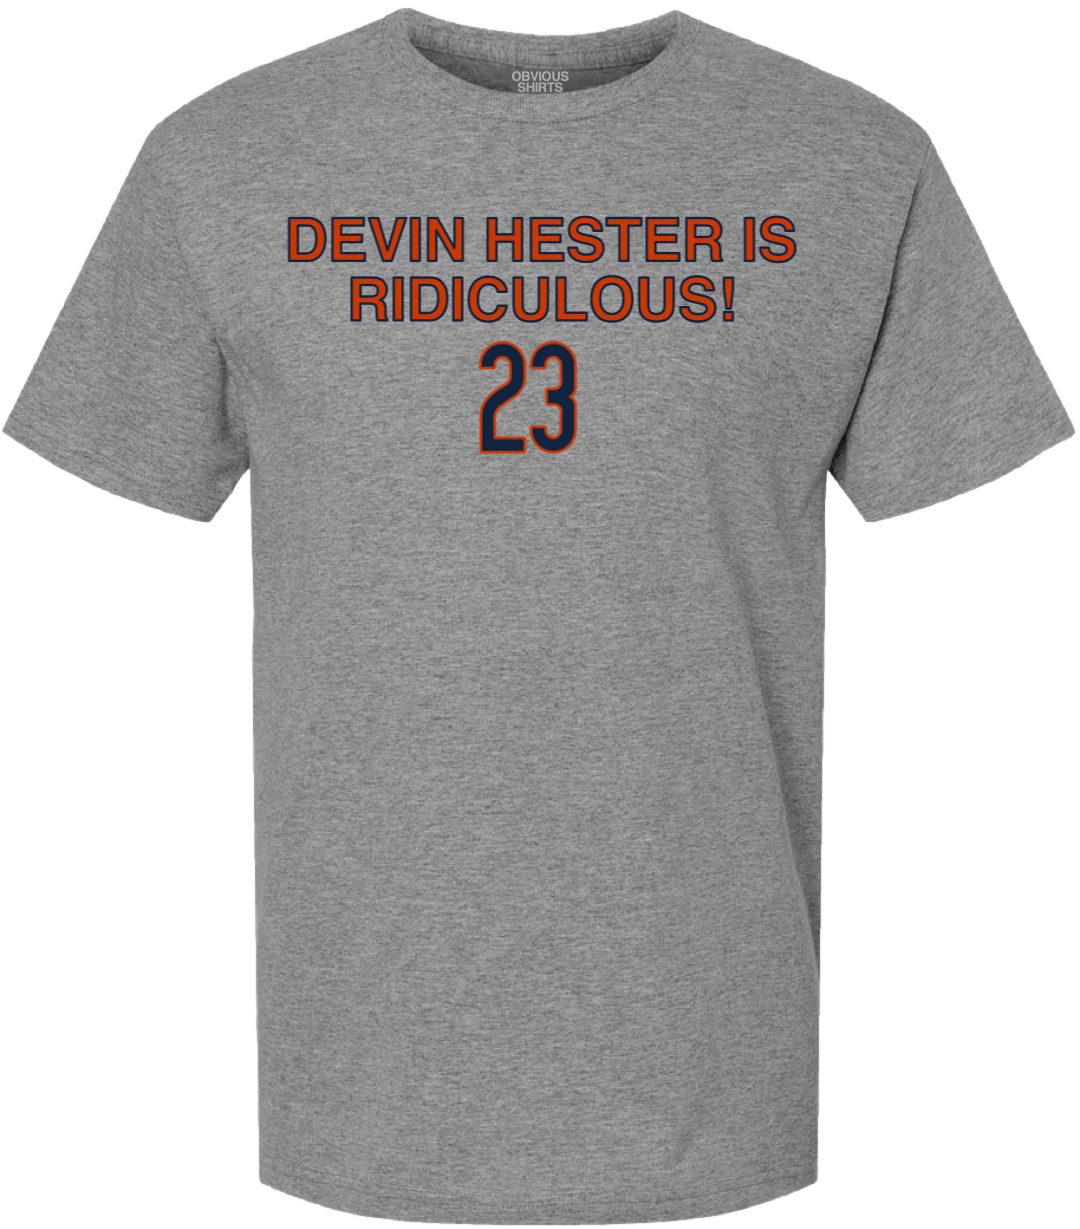 DEVIN HESTER IS RIDICULOUS! - OBVIOUS SHIRTS